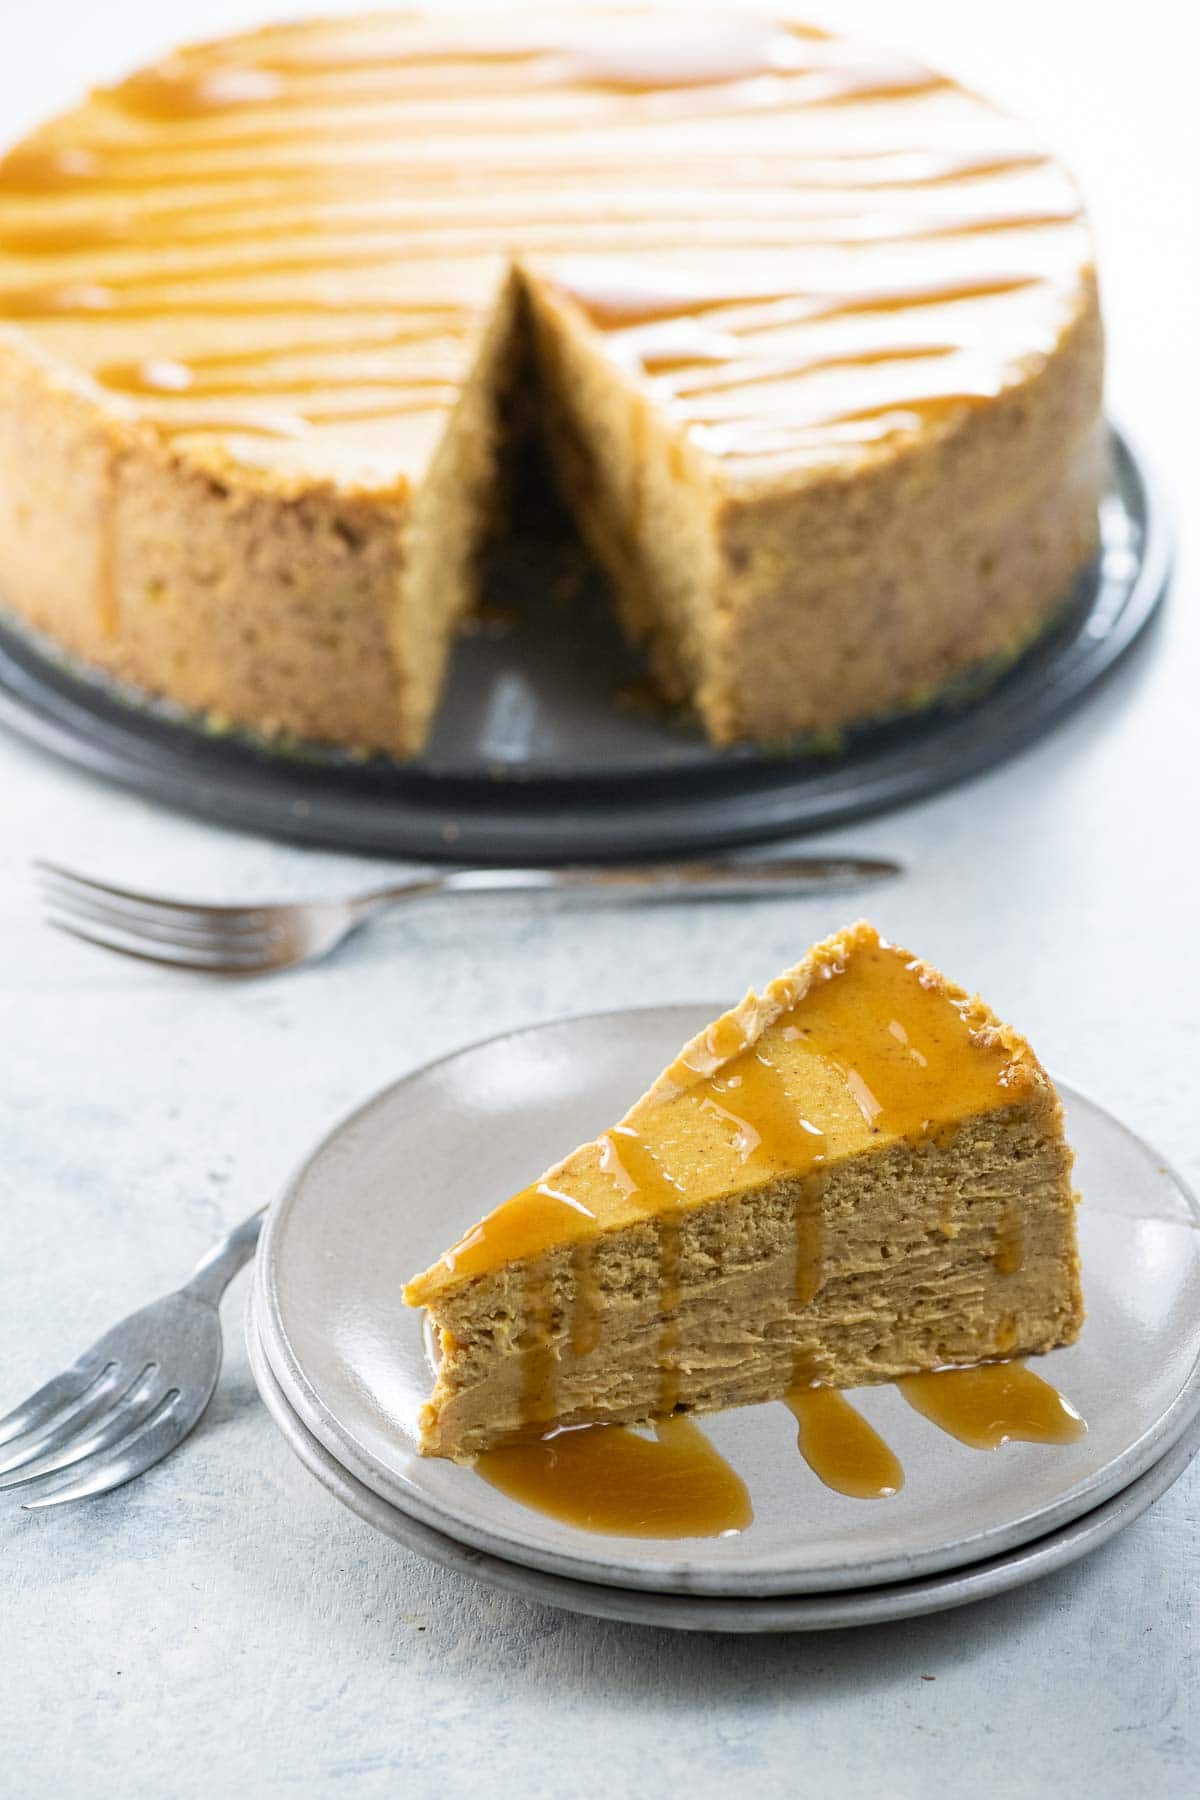 a slice of spiced pumpkin cheesecake on a plate with the rest of the cake in the background